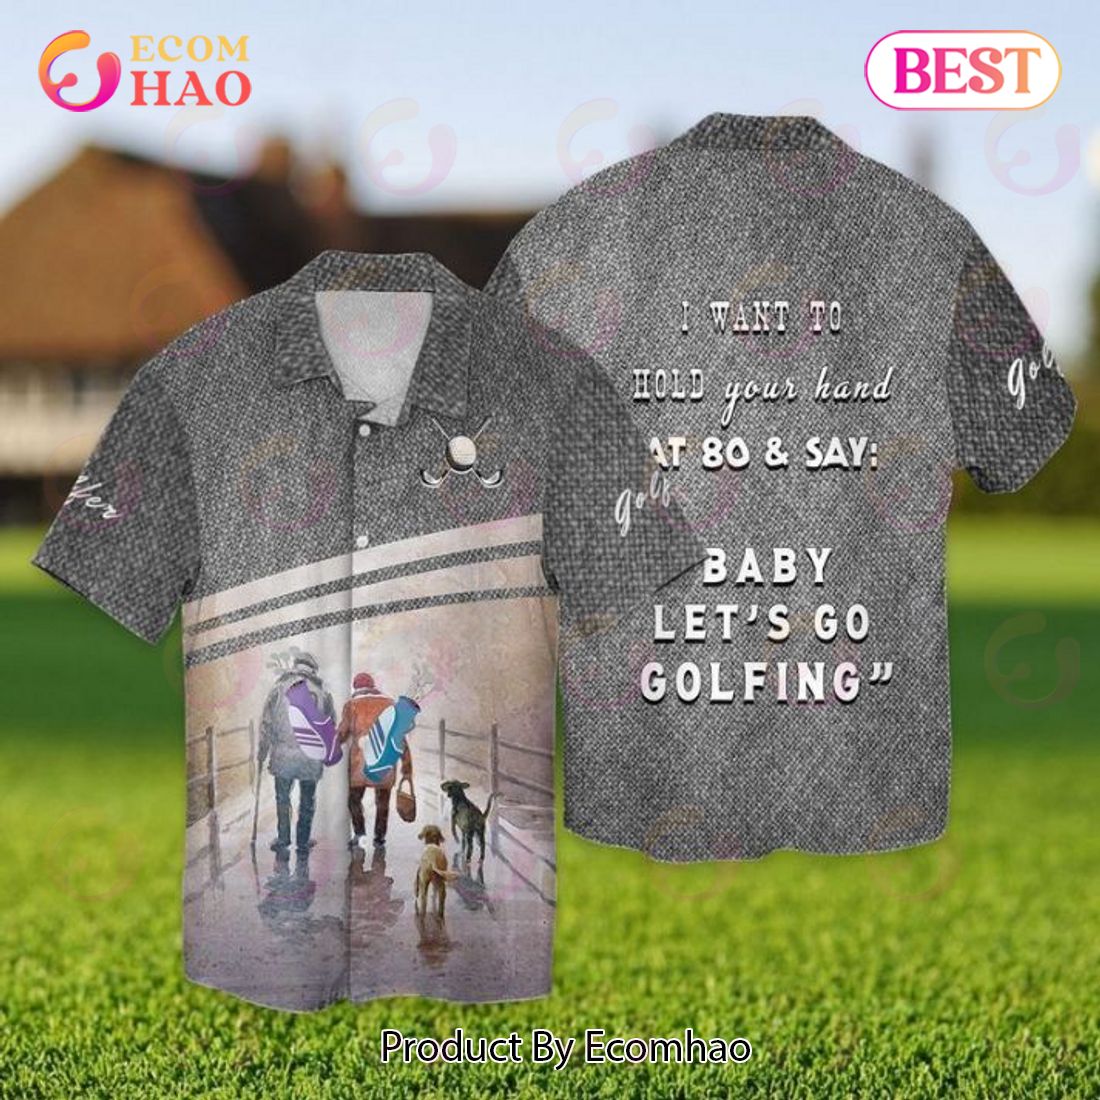 Let’s Go Golfing I Want To Hold Your Hand That 80 And Say Baby Let’s Go Golfing Hawaiian Shirt